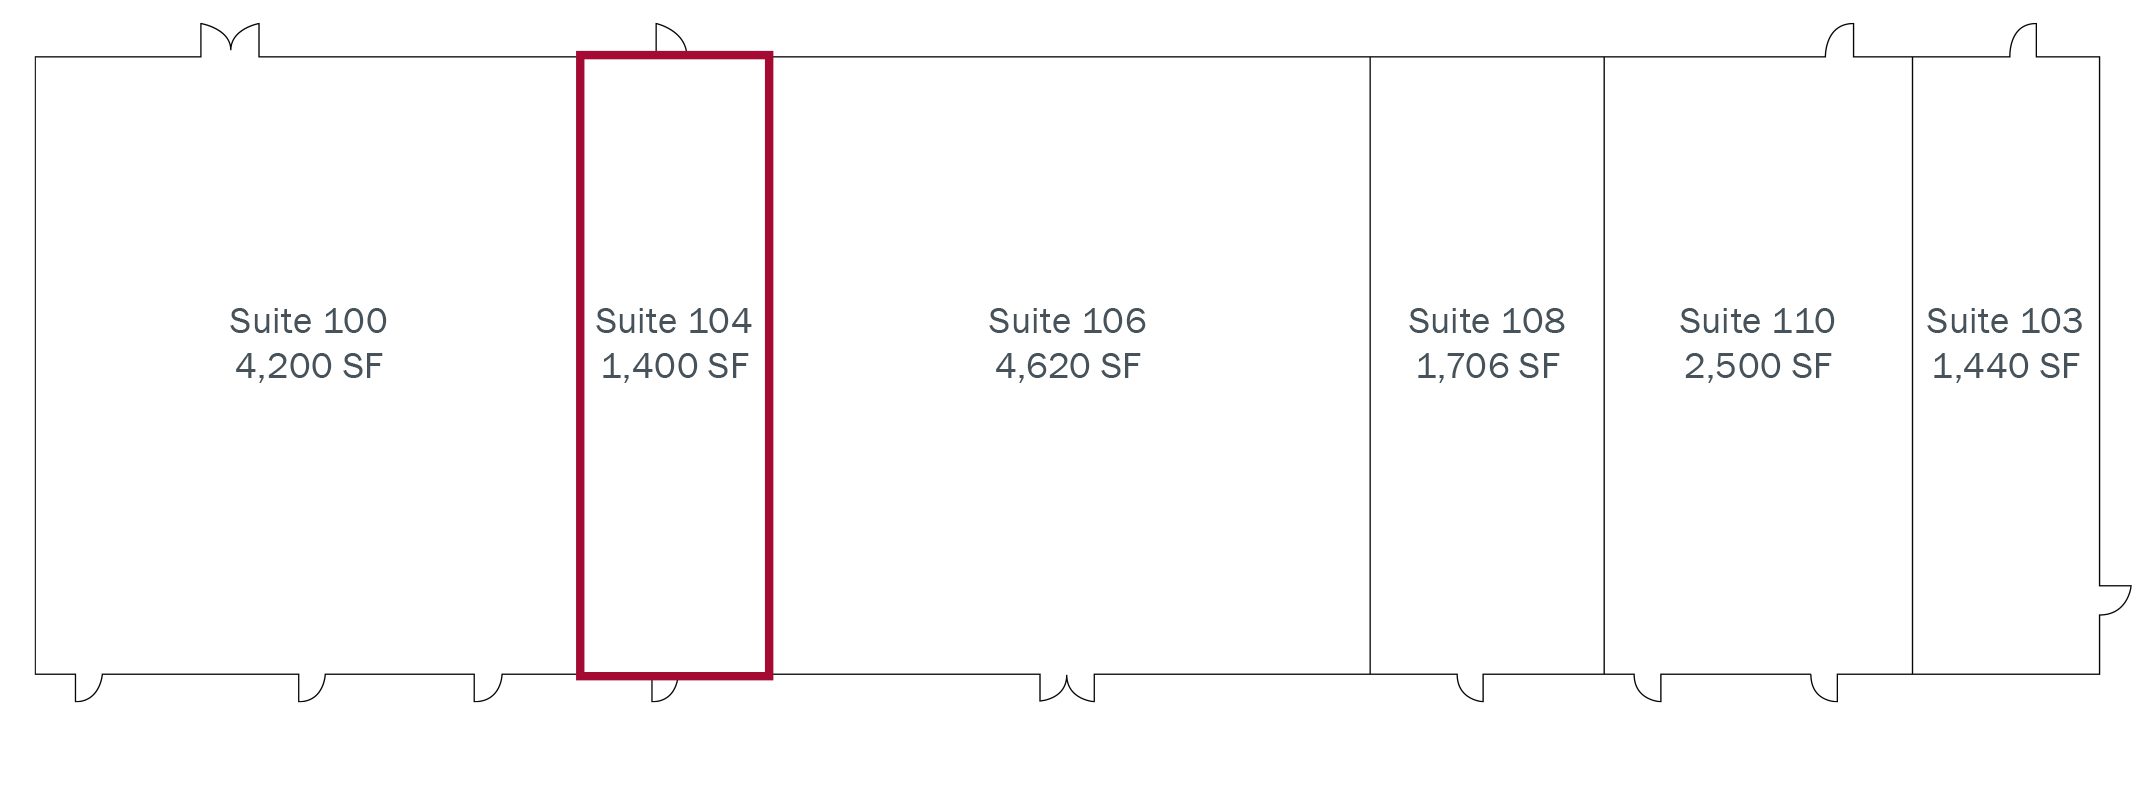 Building plan showing available suite